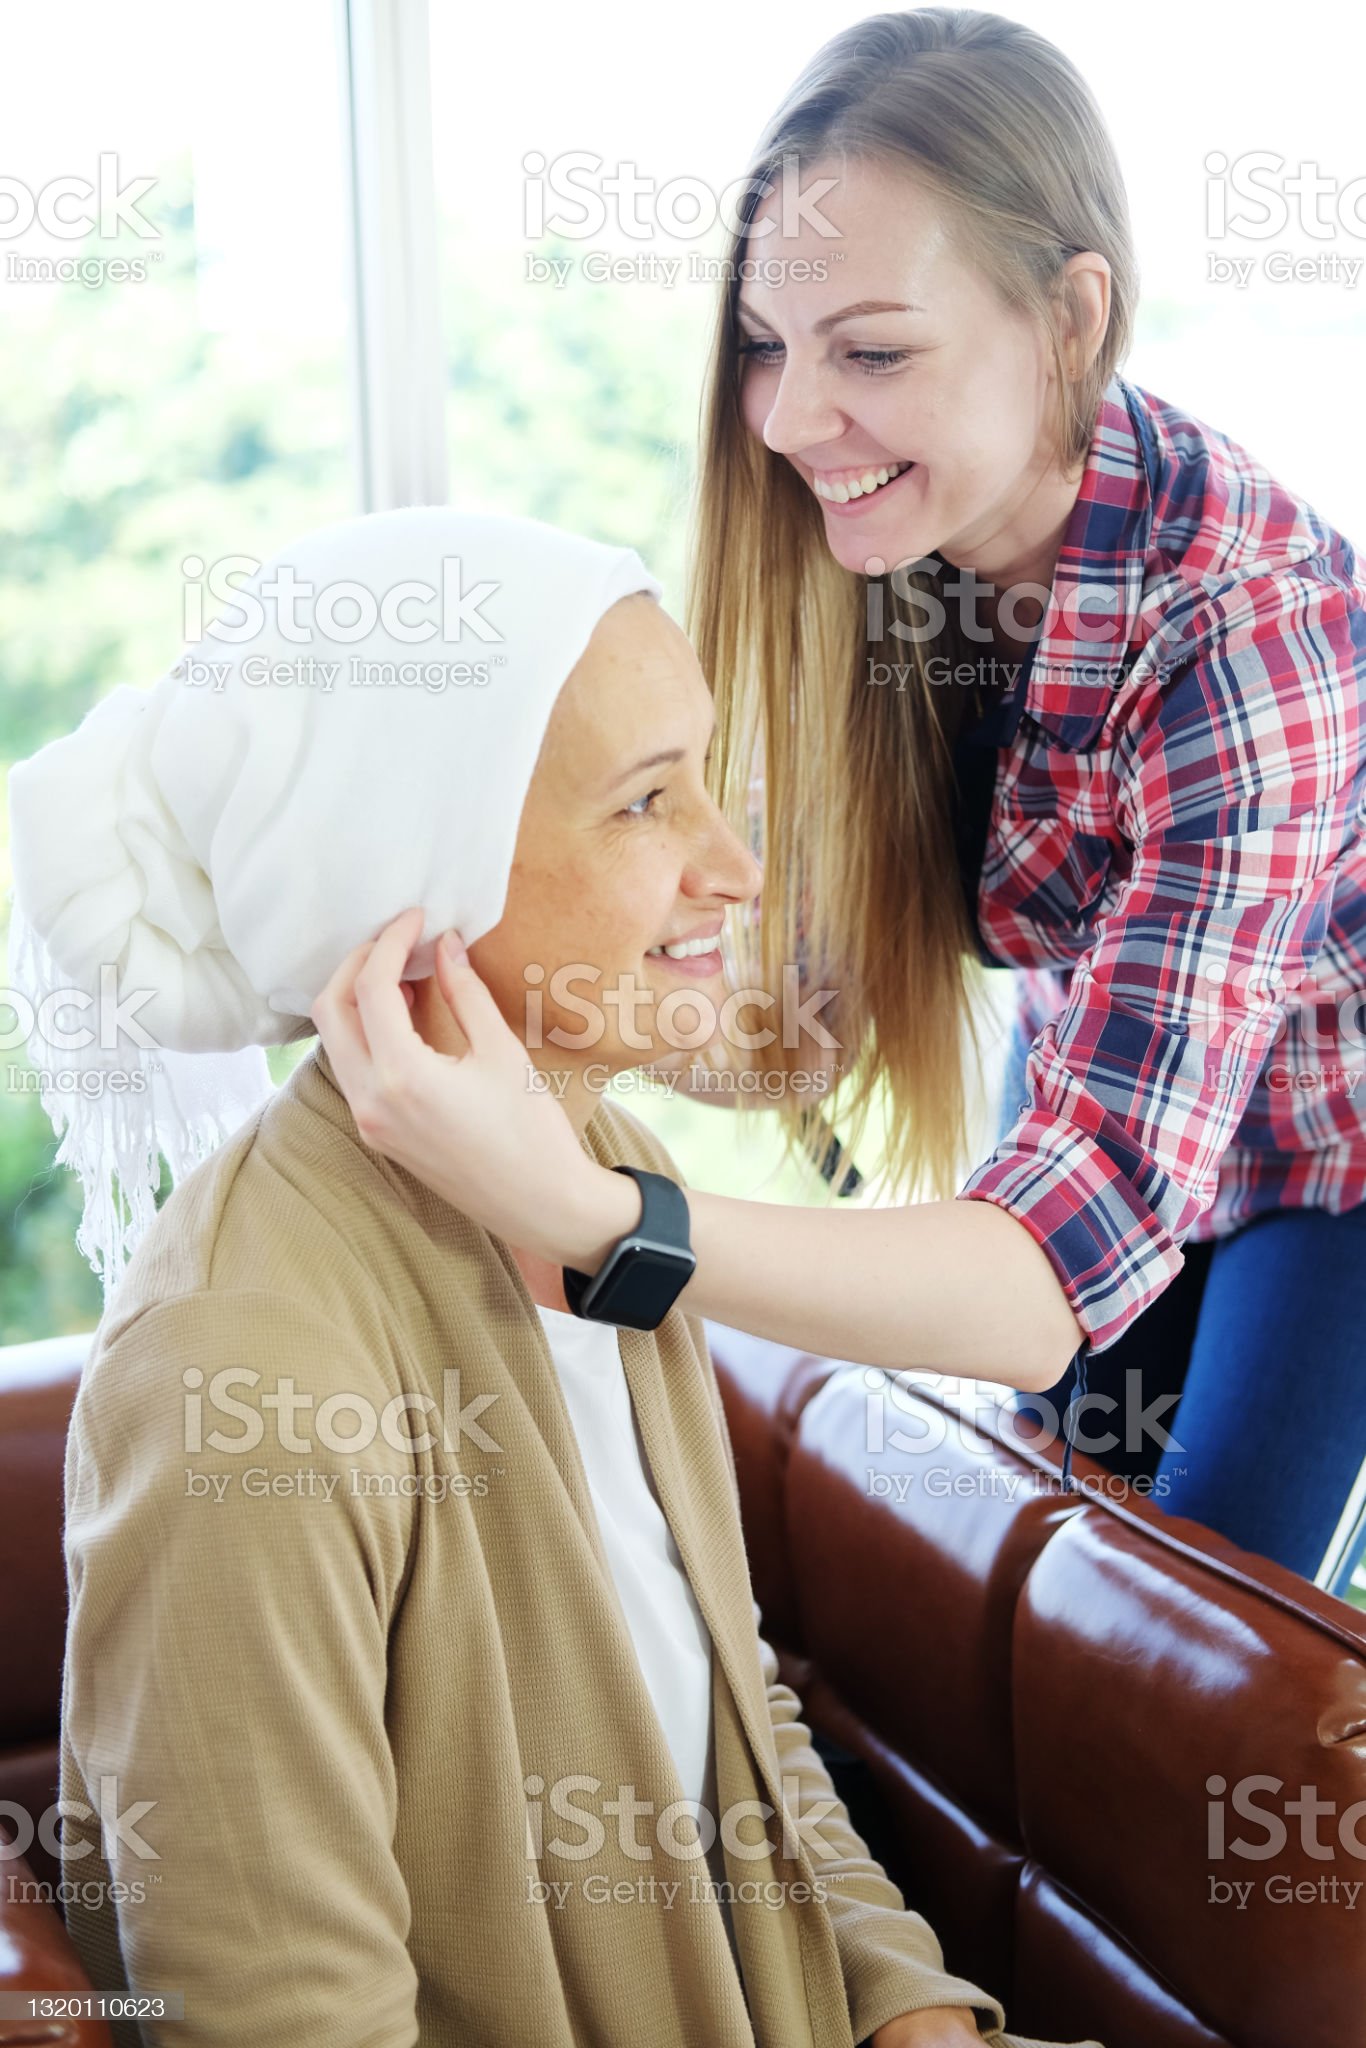 Smiling Caucasian young daughter is hugging and caring her Elderly Mother in white headscarf after chemotherapy because she is suffering from cancer or Leukemia patient. Focus on young woman